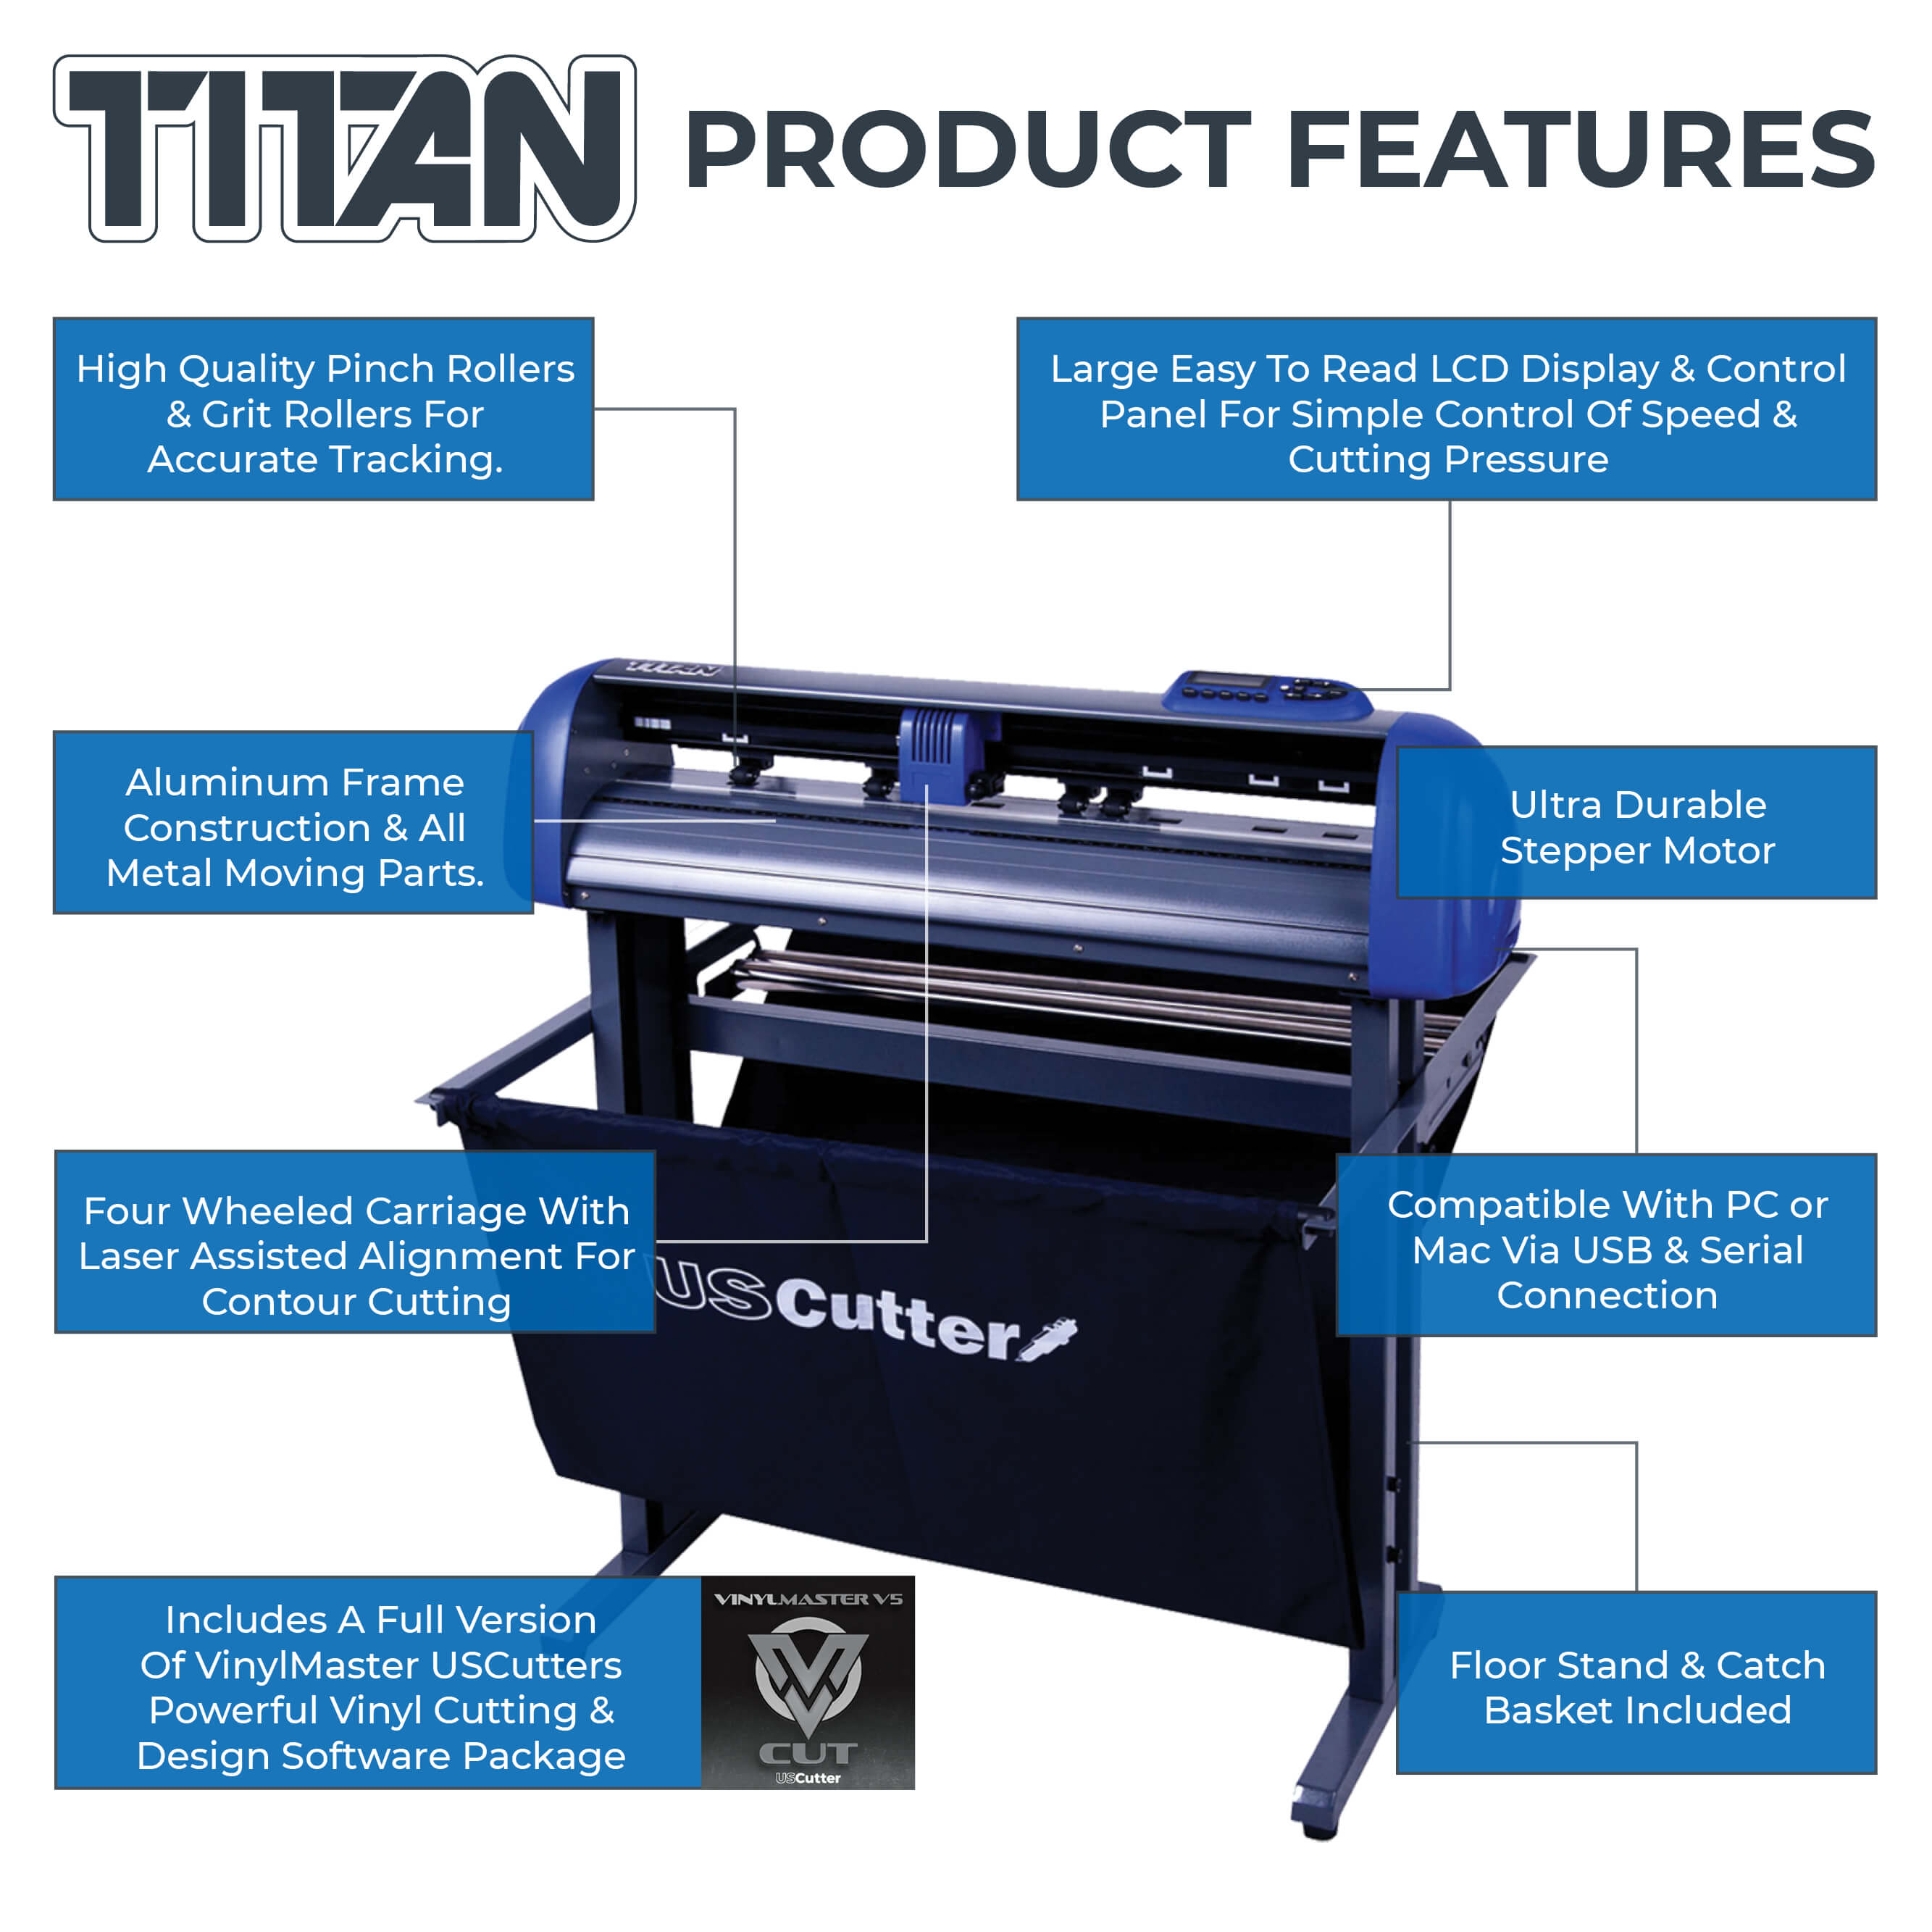 28-inch USCutter Titan 2 Vinyl Cutter/Plotter with Stand Basket and Design and Cut Software 